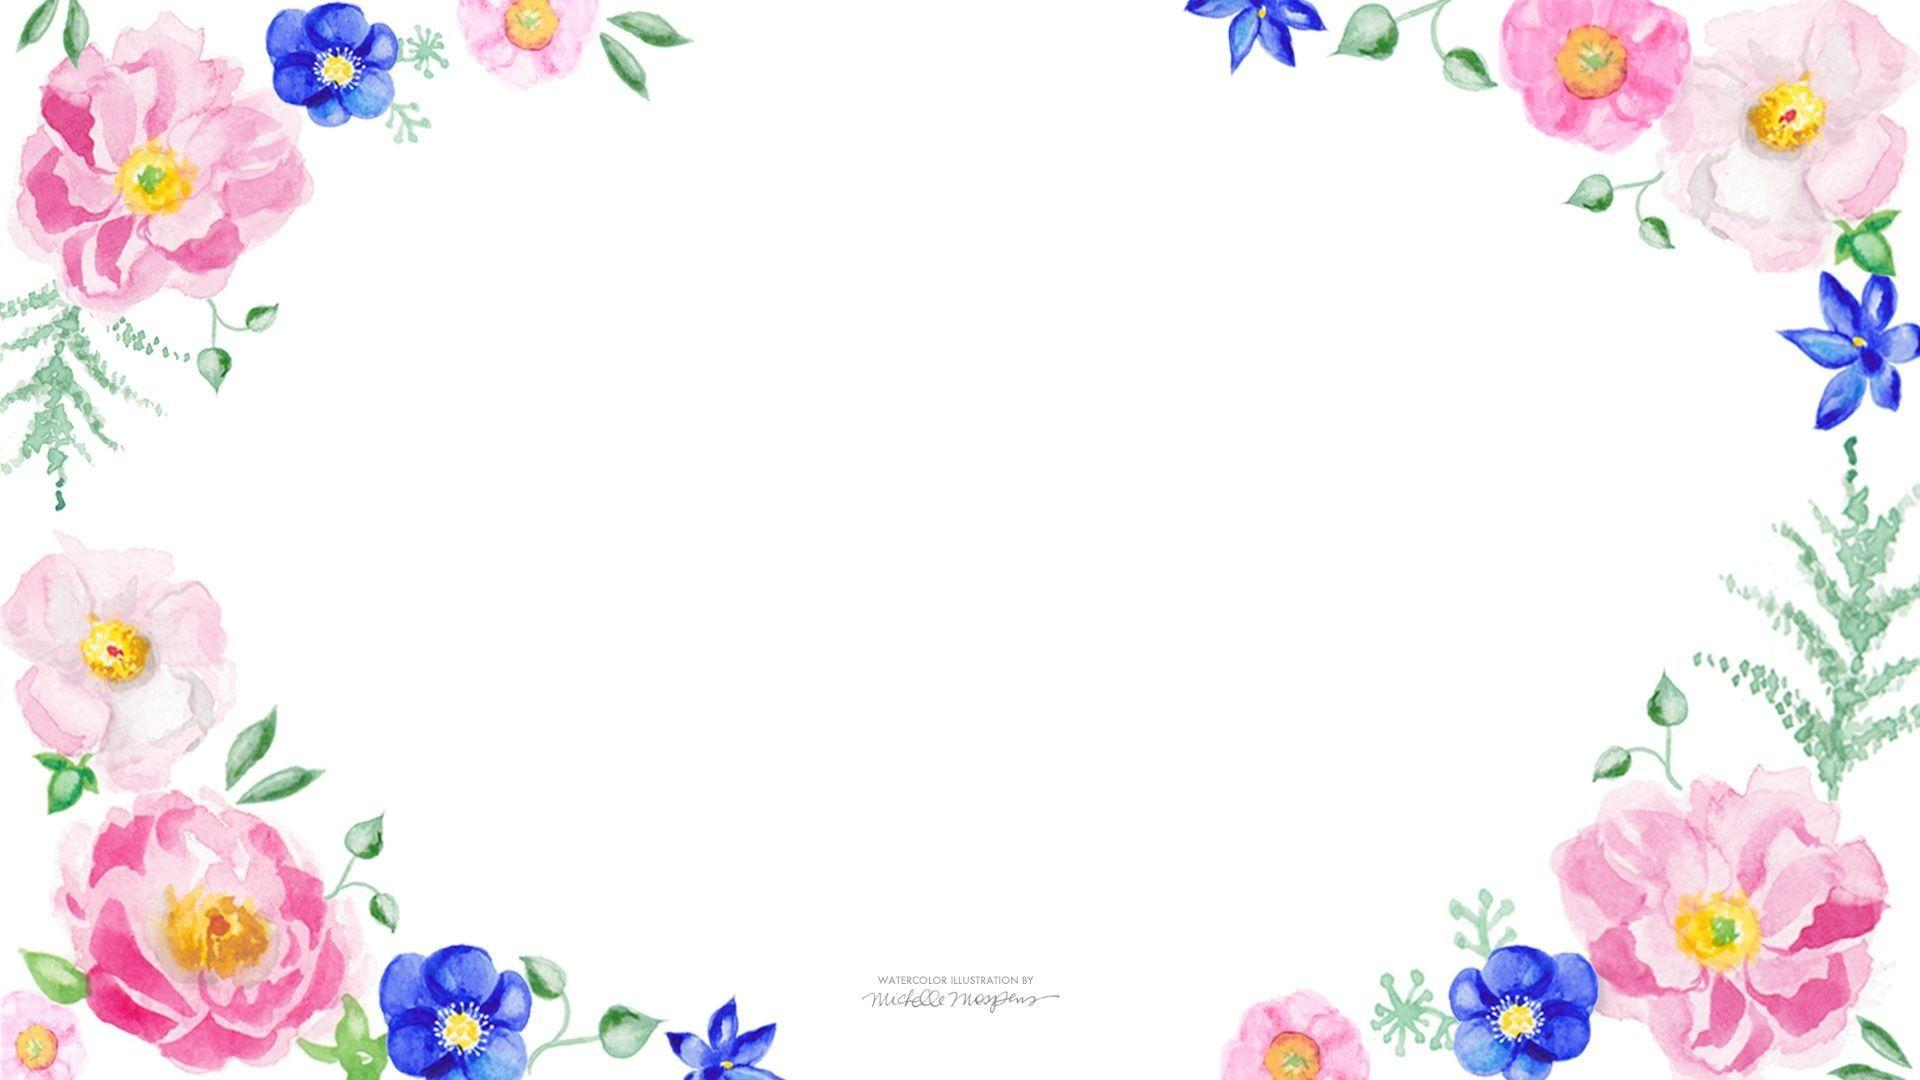 1920x1080 Watercolor Flowers Wallpapers